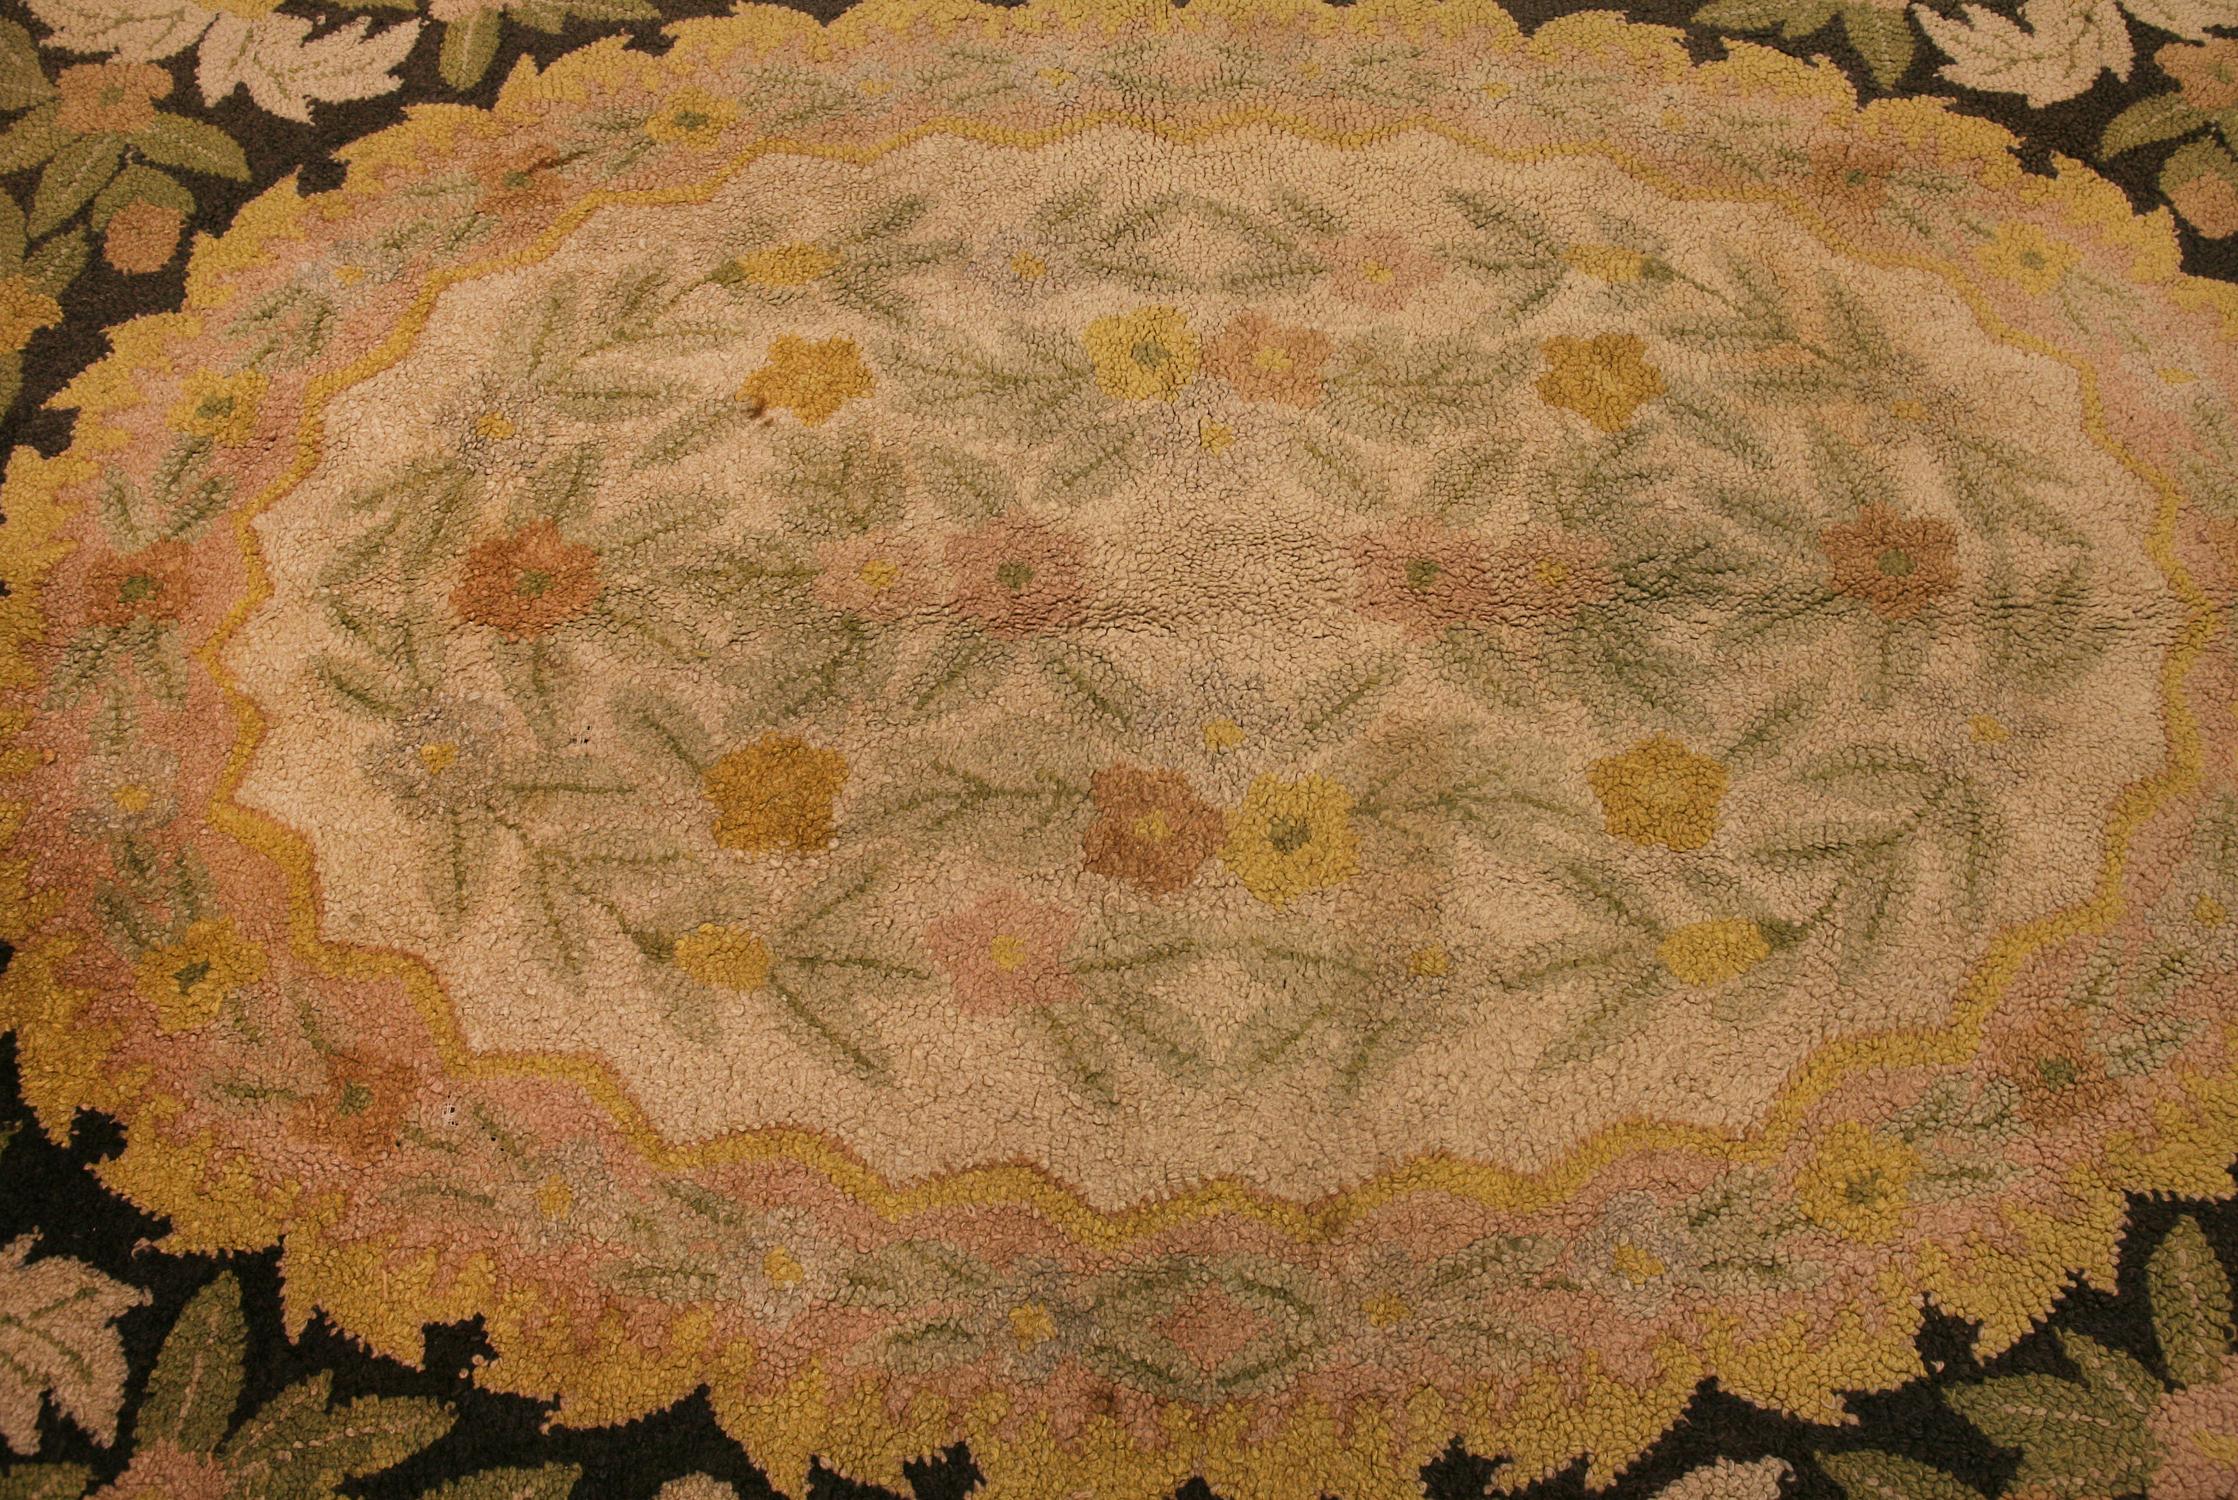 This is an American hook rug woven in the United States during the 1920’s and it measures 265 x 170 in cm. This rug has an oval shape as many American hooked rugs do. It has been designed with a floral border and floral field. This rug is in